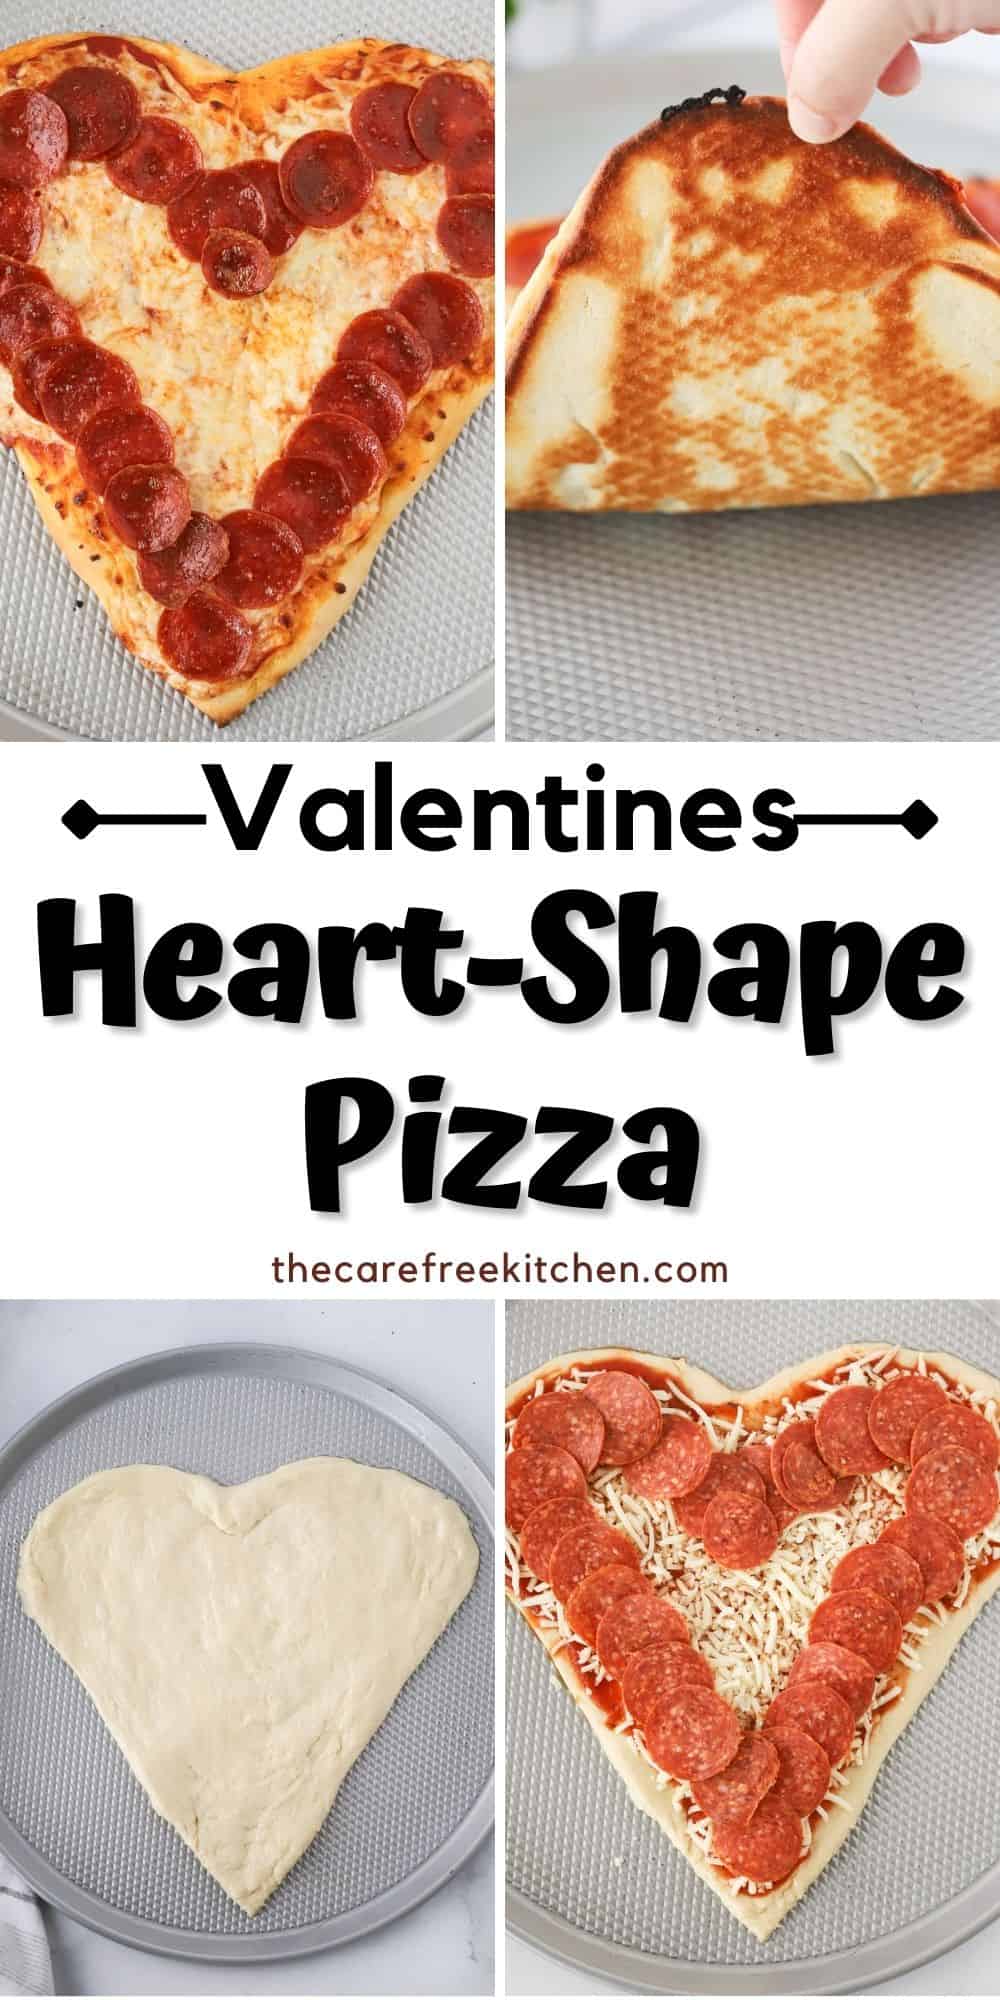 How To Make Heart Shaped Pizza - The Carefree Kitchen